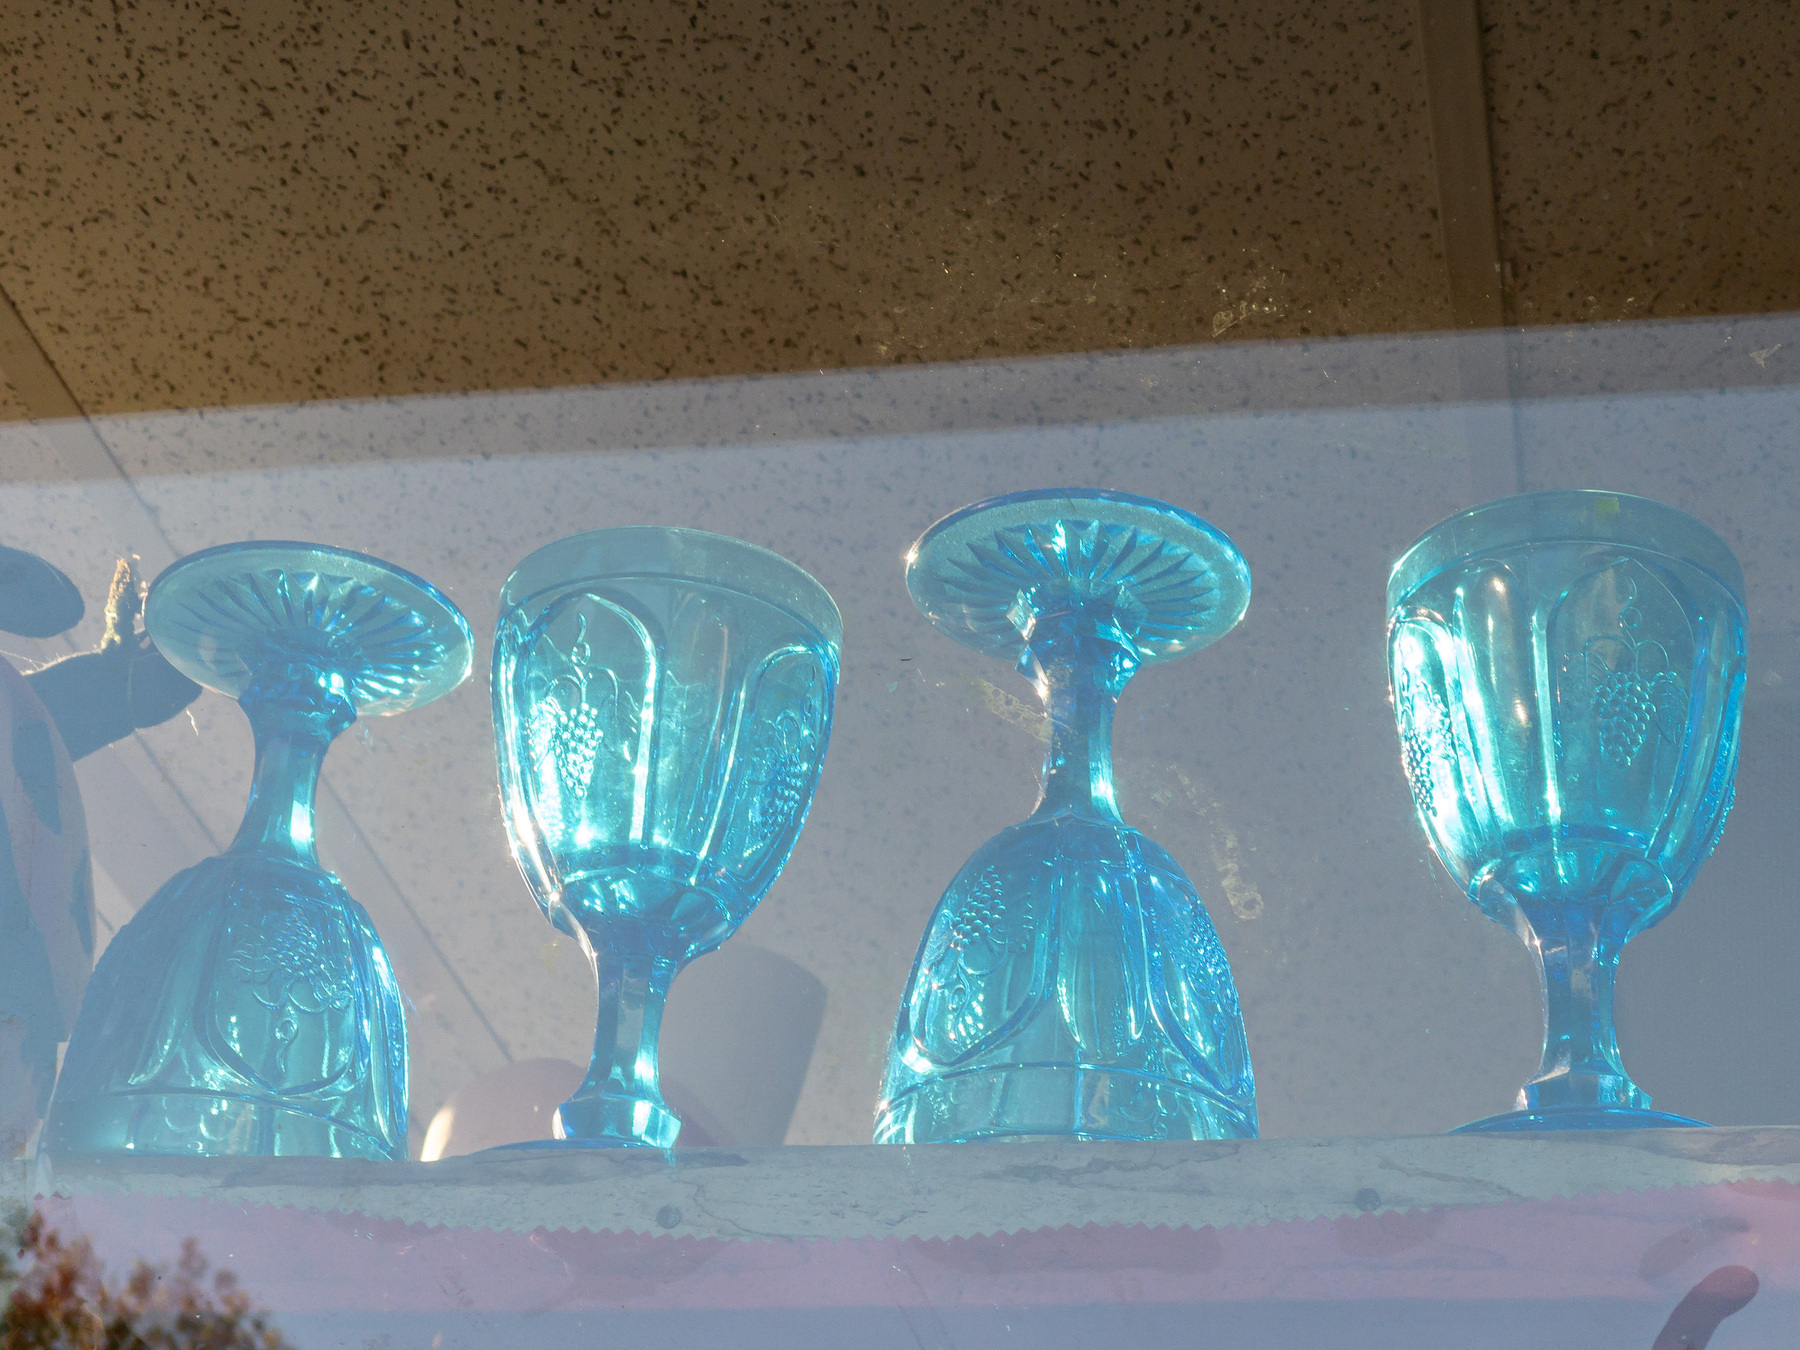 Sunlit blue glass goblets on a glass shelf in the window of an vintage store.